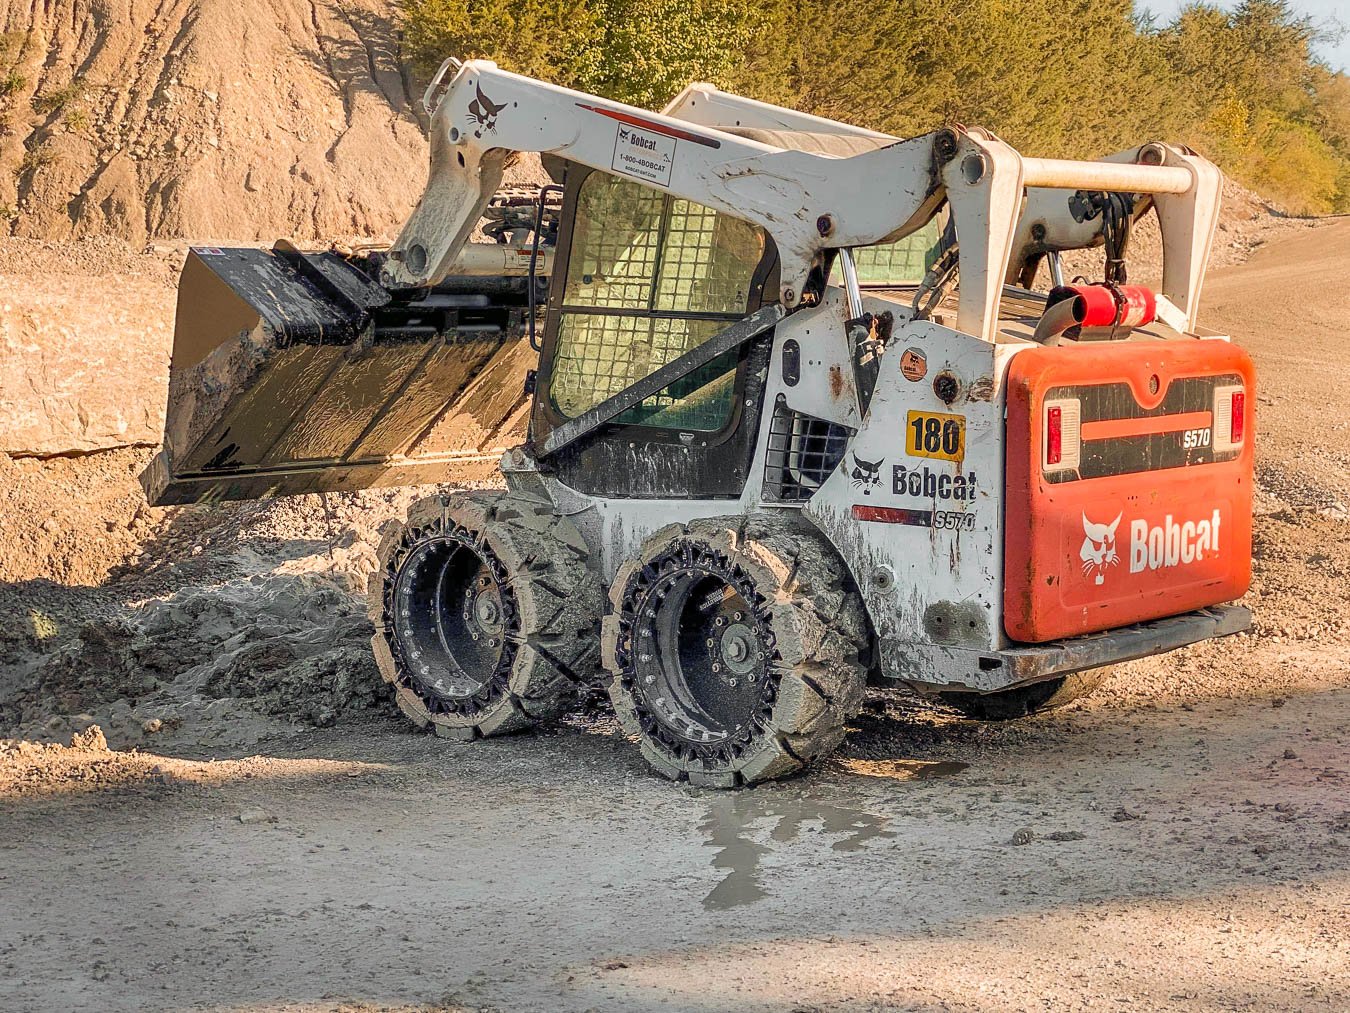 This image shows a BOBCAT S570 with our skid steer tires the EWRS-HS